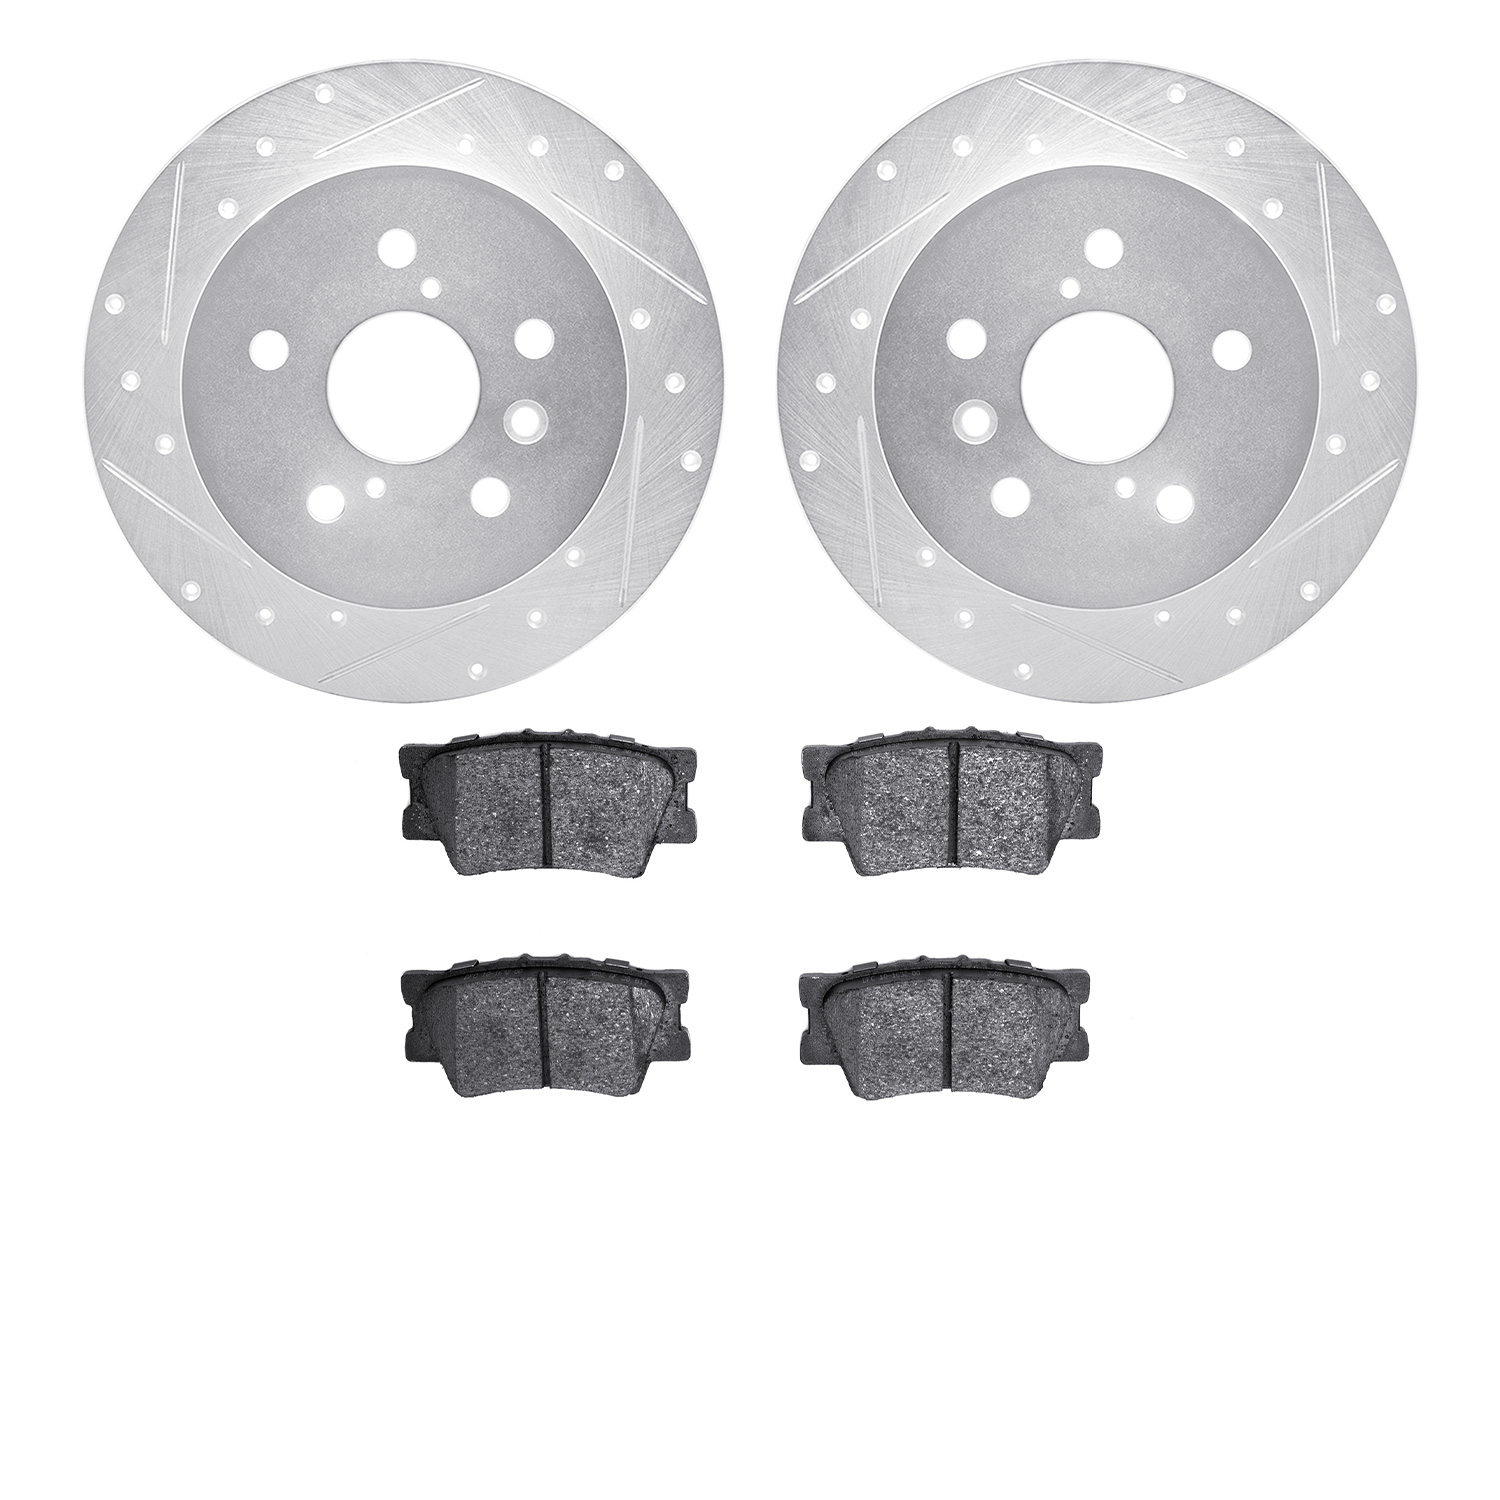 7302-76181 Drilled/Slotted Brake Rotor with 3000-Series Ceramic Brake Pads Kit [Silver], Fits Select Lexus/Toyota/Scion, Positio